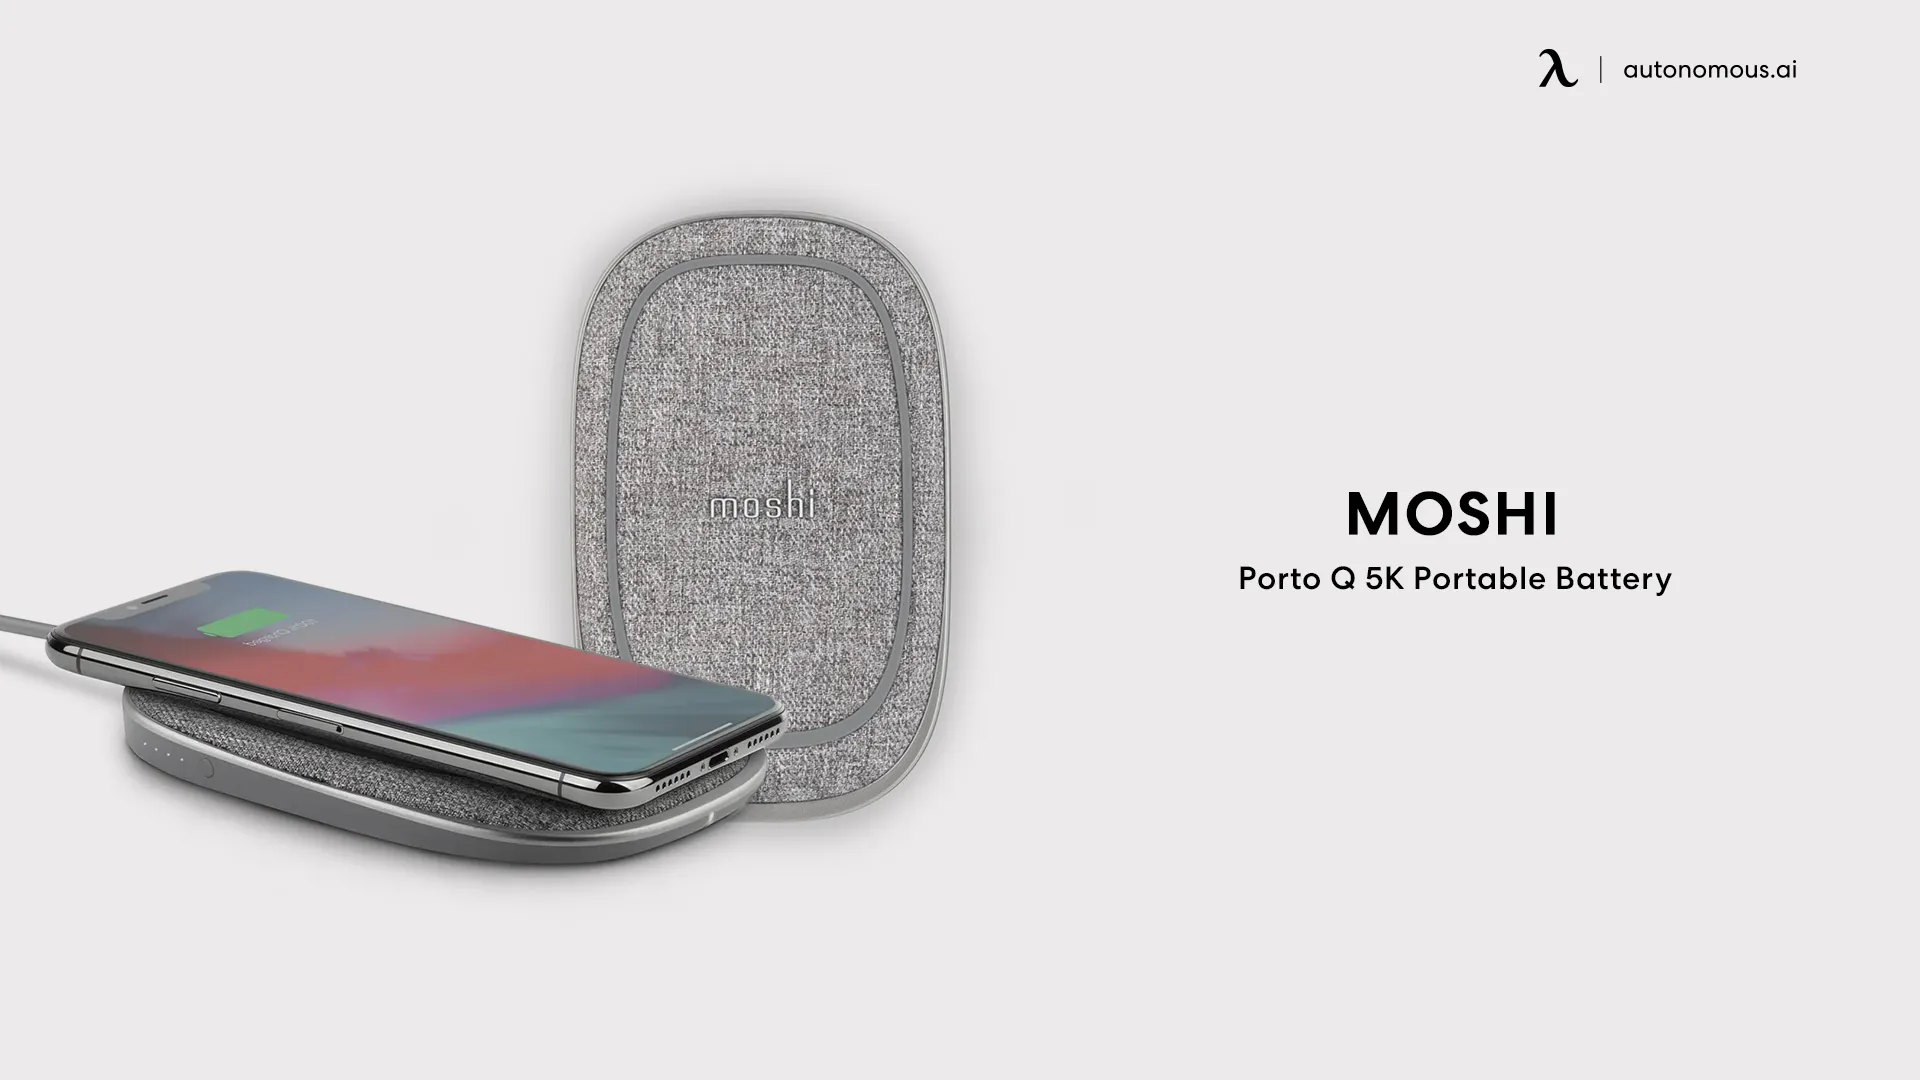 Moshi Porto Q 5K Portable Battery with Built-in Wireless Charger